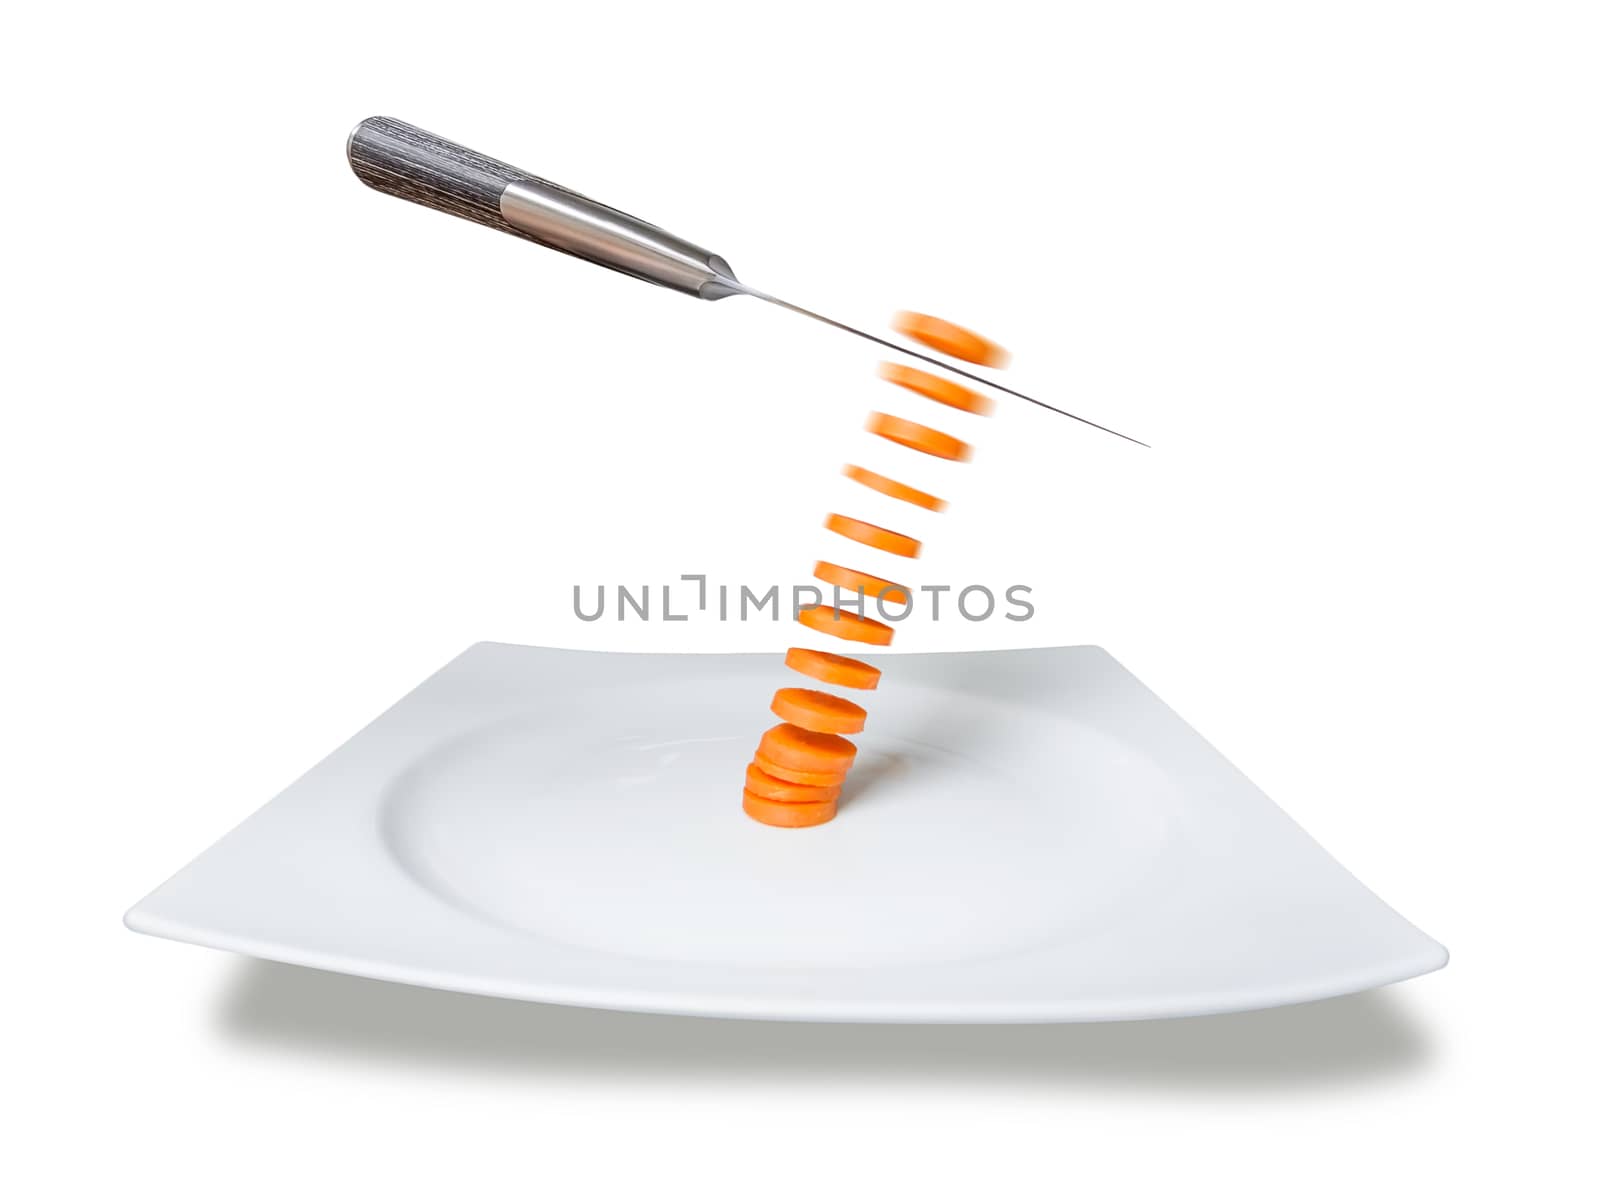 Knife slicing carrot in the air over plate isolated on white background